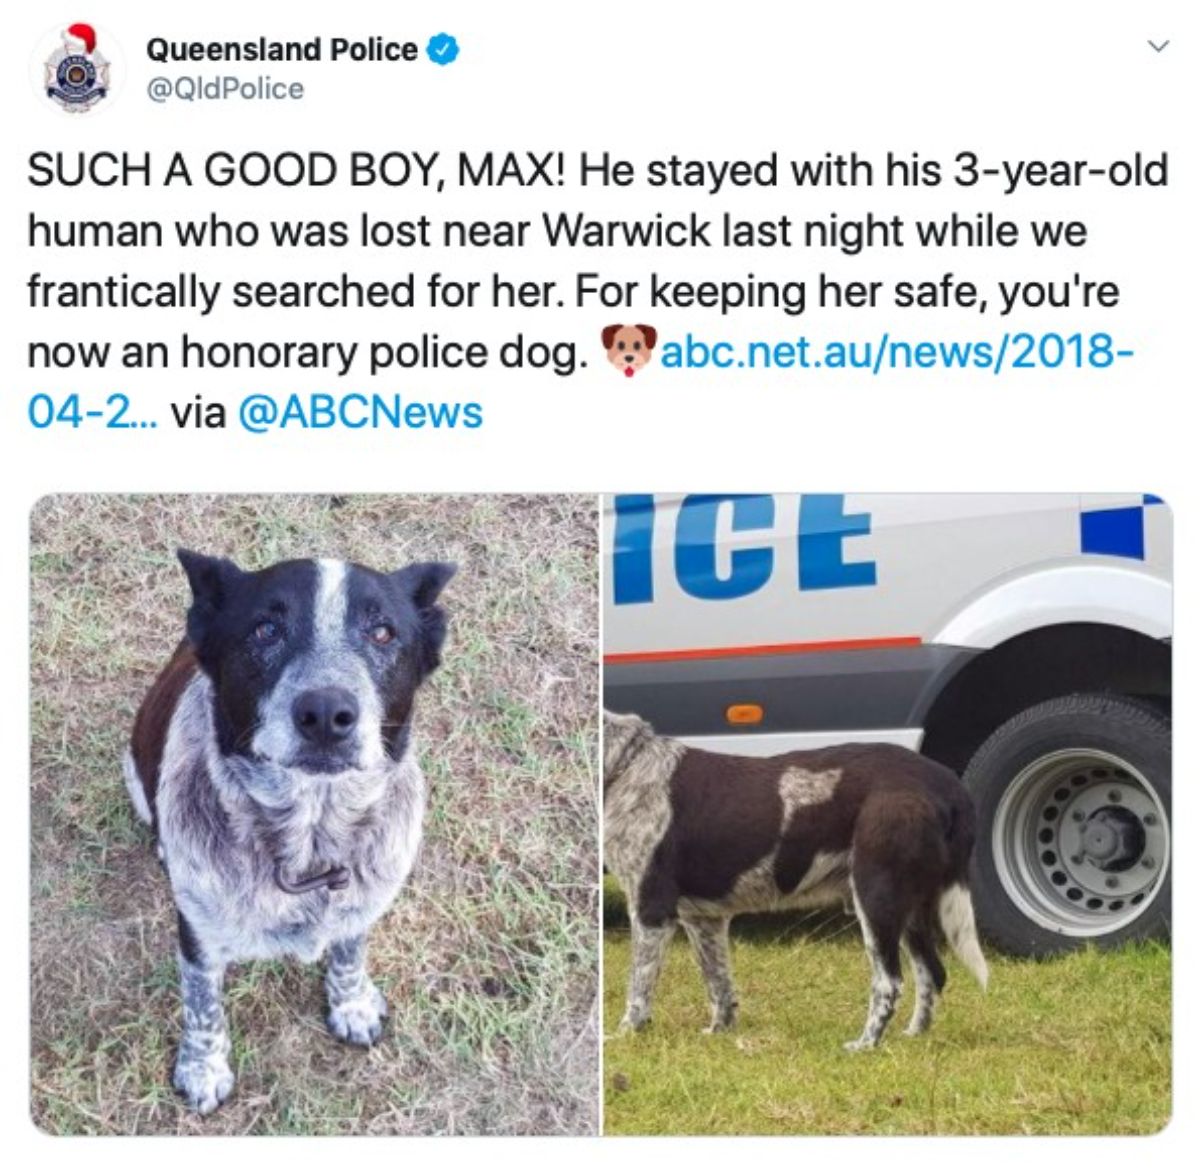 two photos of a black and white blue heeler dog sitting on the ground and standing next to a police vehicle in a tweet from queensland police saying SCUH A GOOD BOY MAX. he stayed with his 3-year-old human who was lost near warwick last night hile we frantically searched for her. for keeping her safe you're now an honorary police dog